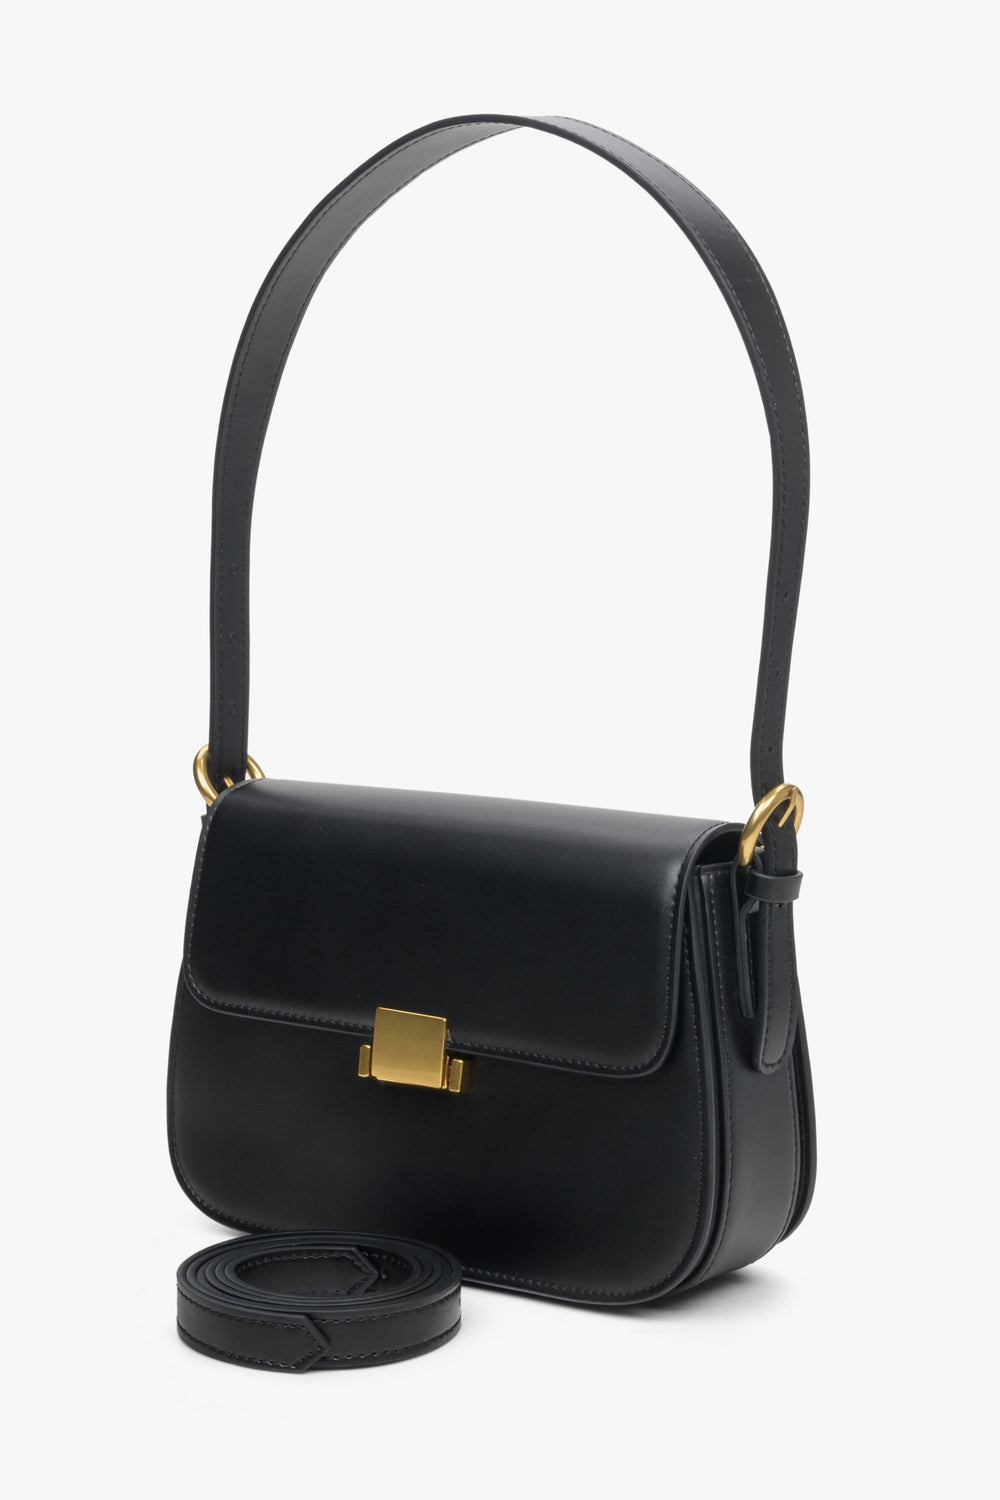 Women's black handbag made of genuine leather with gold accents by Estro.